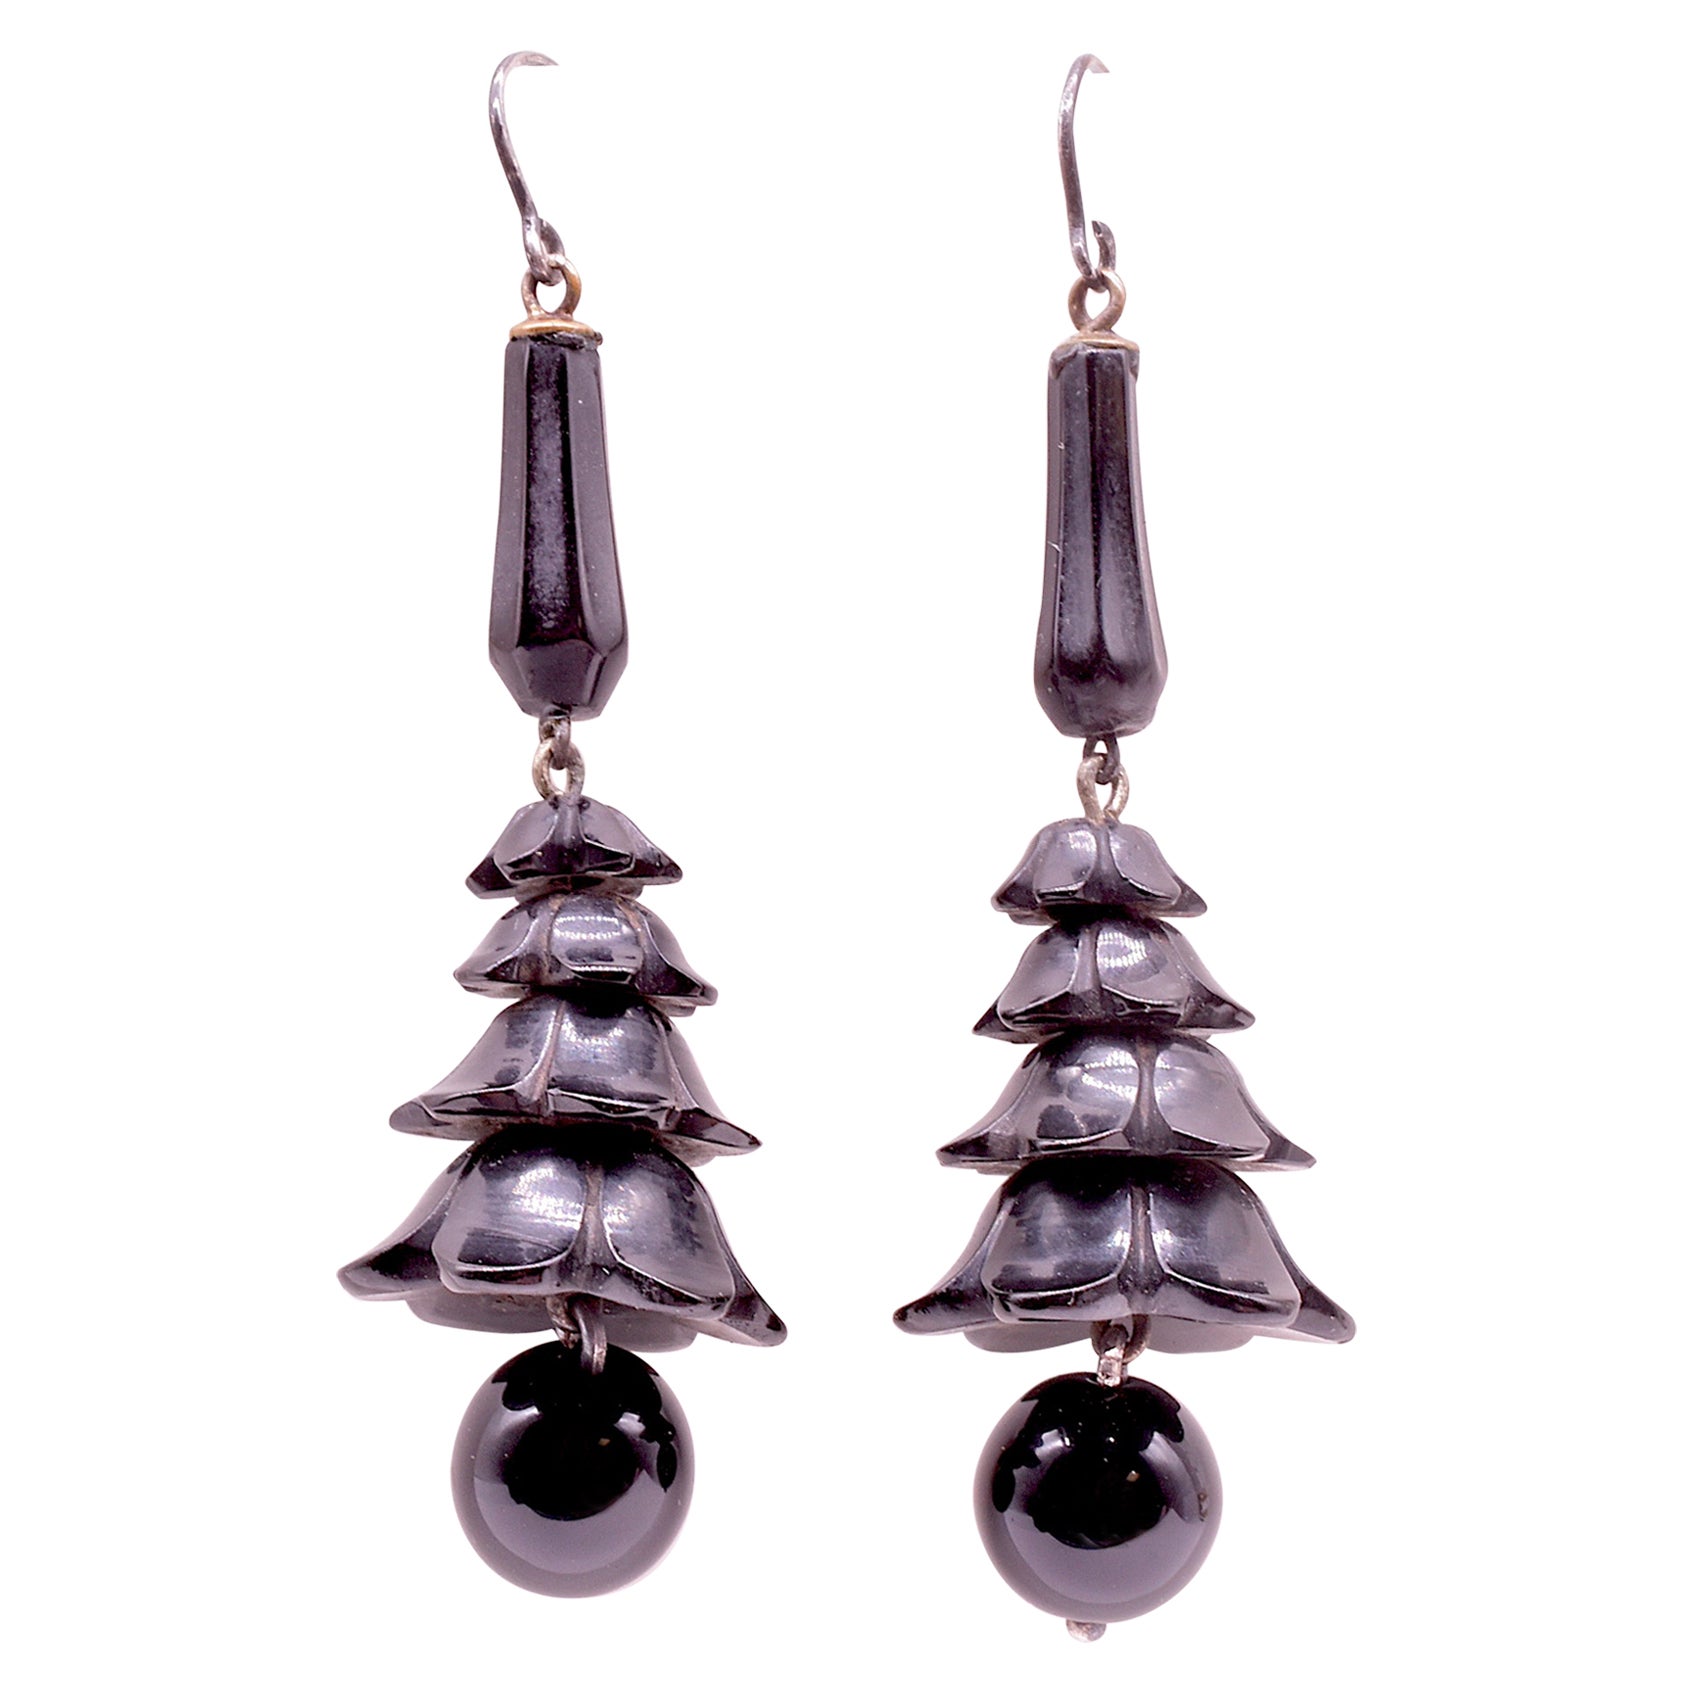 Whitby Jet Carved Earrings with Dangling Jet Balls